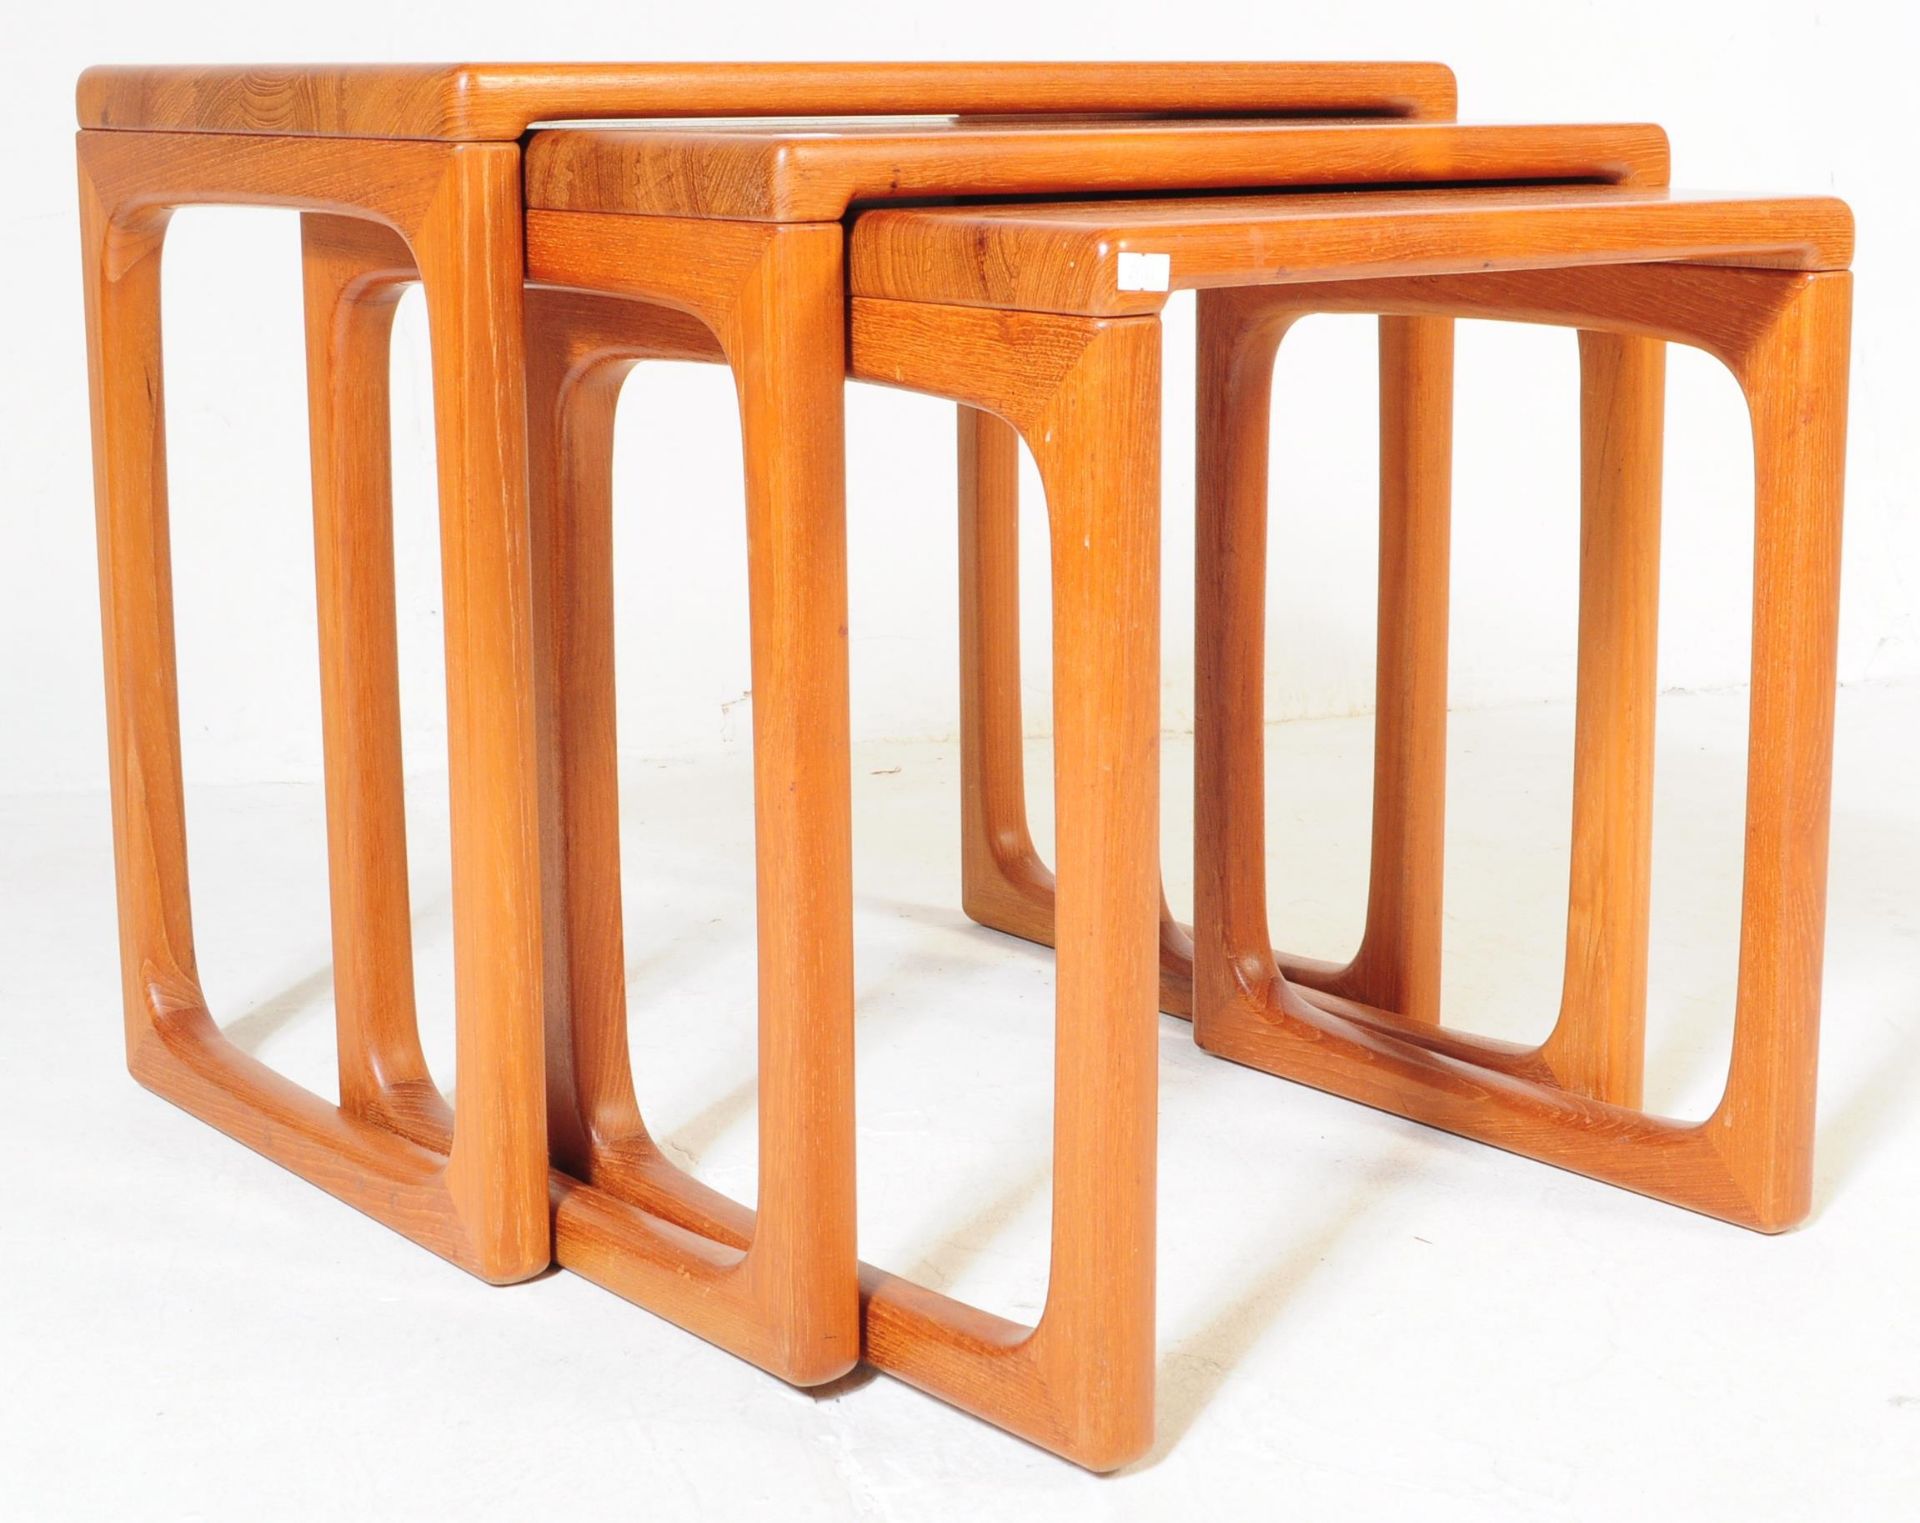 A VINTAGE RETRO 1970S TEAK NEST OF TABLES BY G-PLAN - Image 3 of 5